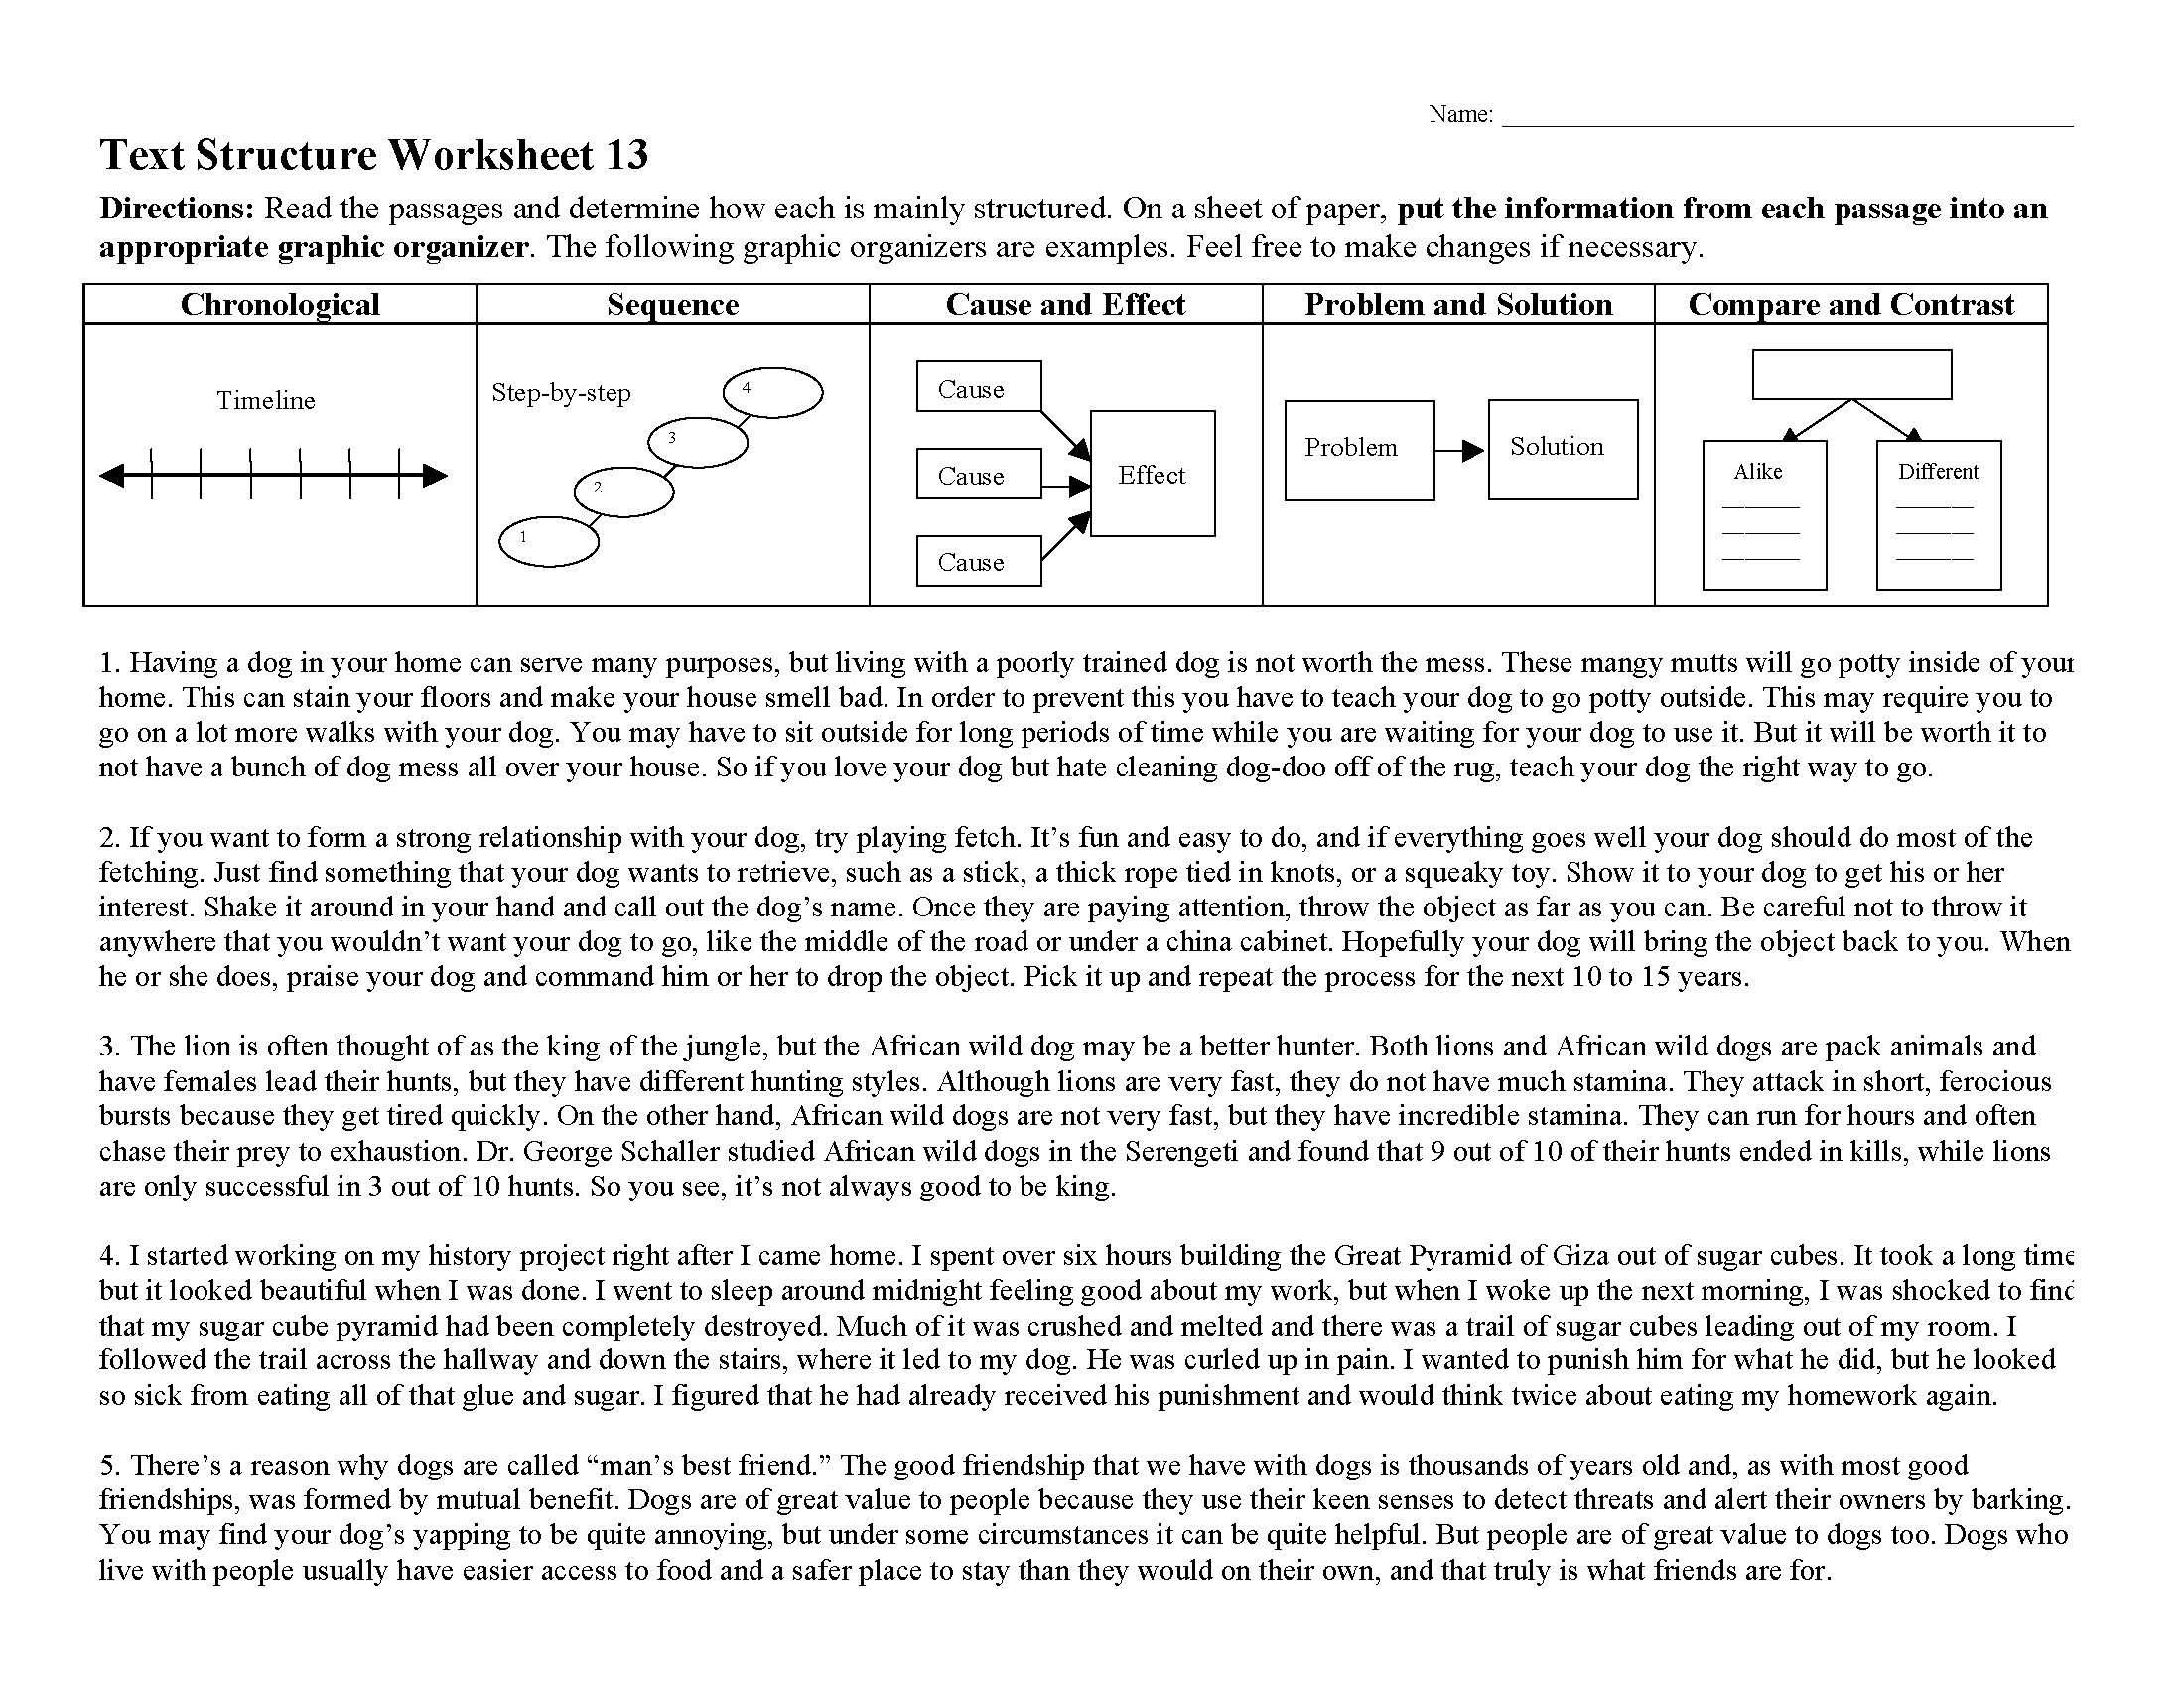 This is a preview image of Text Structure Worksheet 13. Click on it to enlarge it or view the source file.